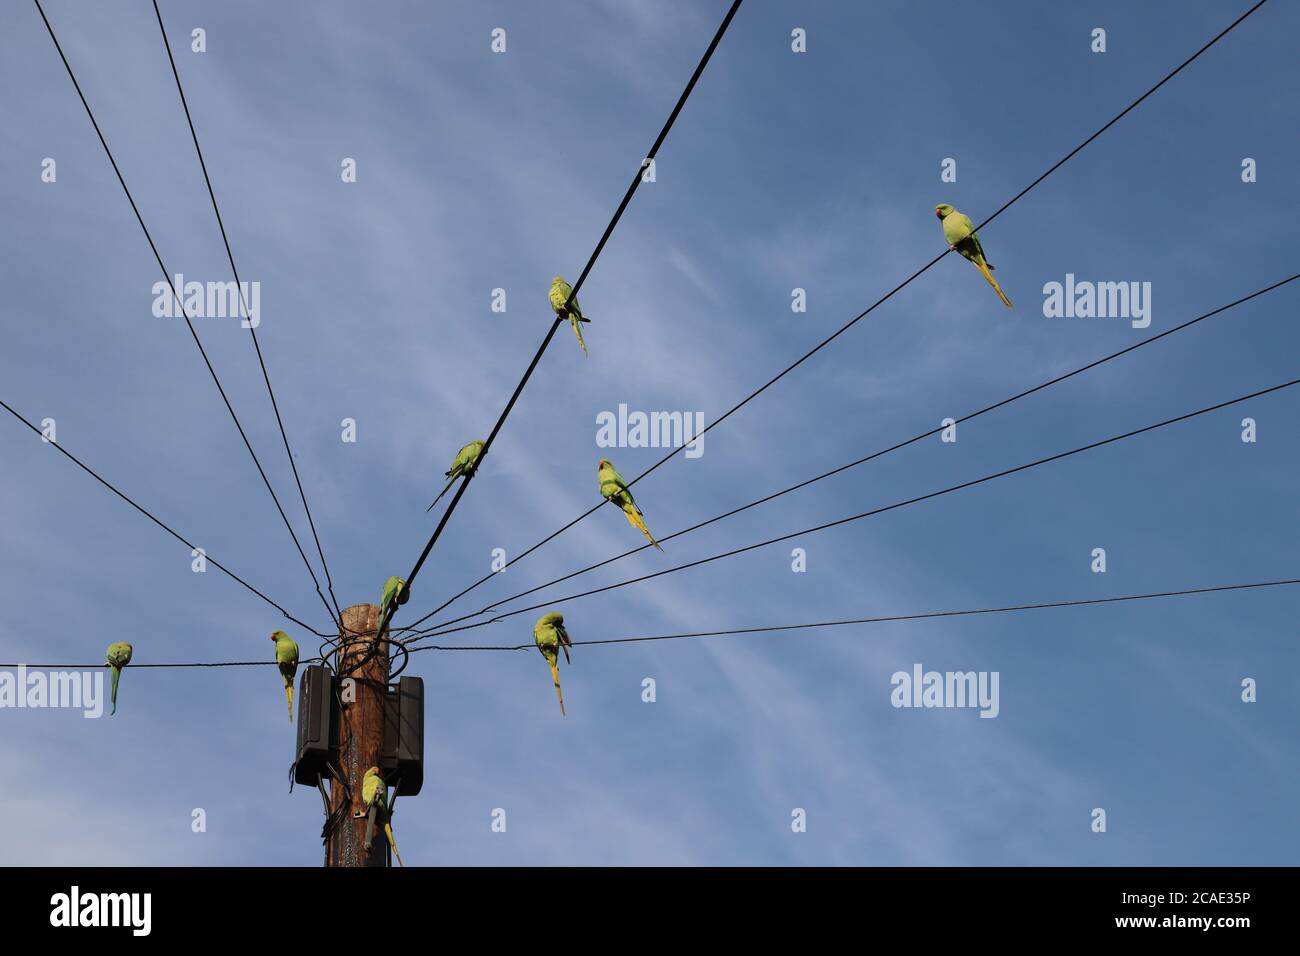 Parakeets on telegraph wires Stock Photo